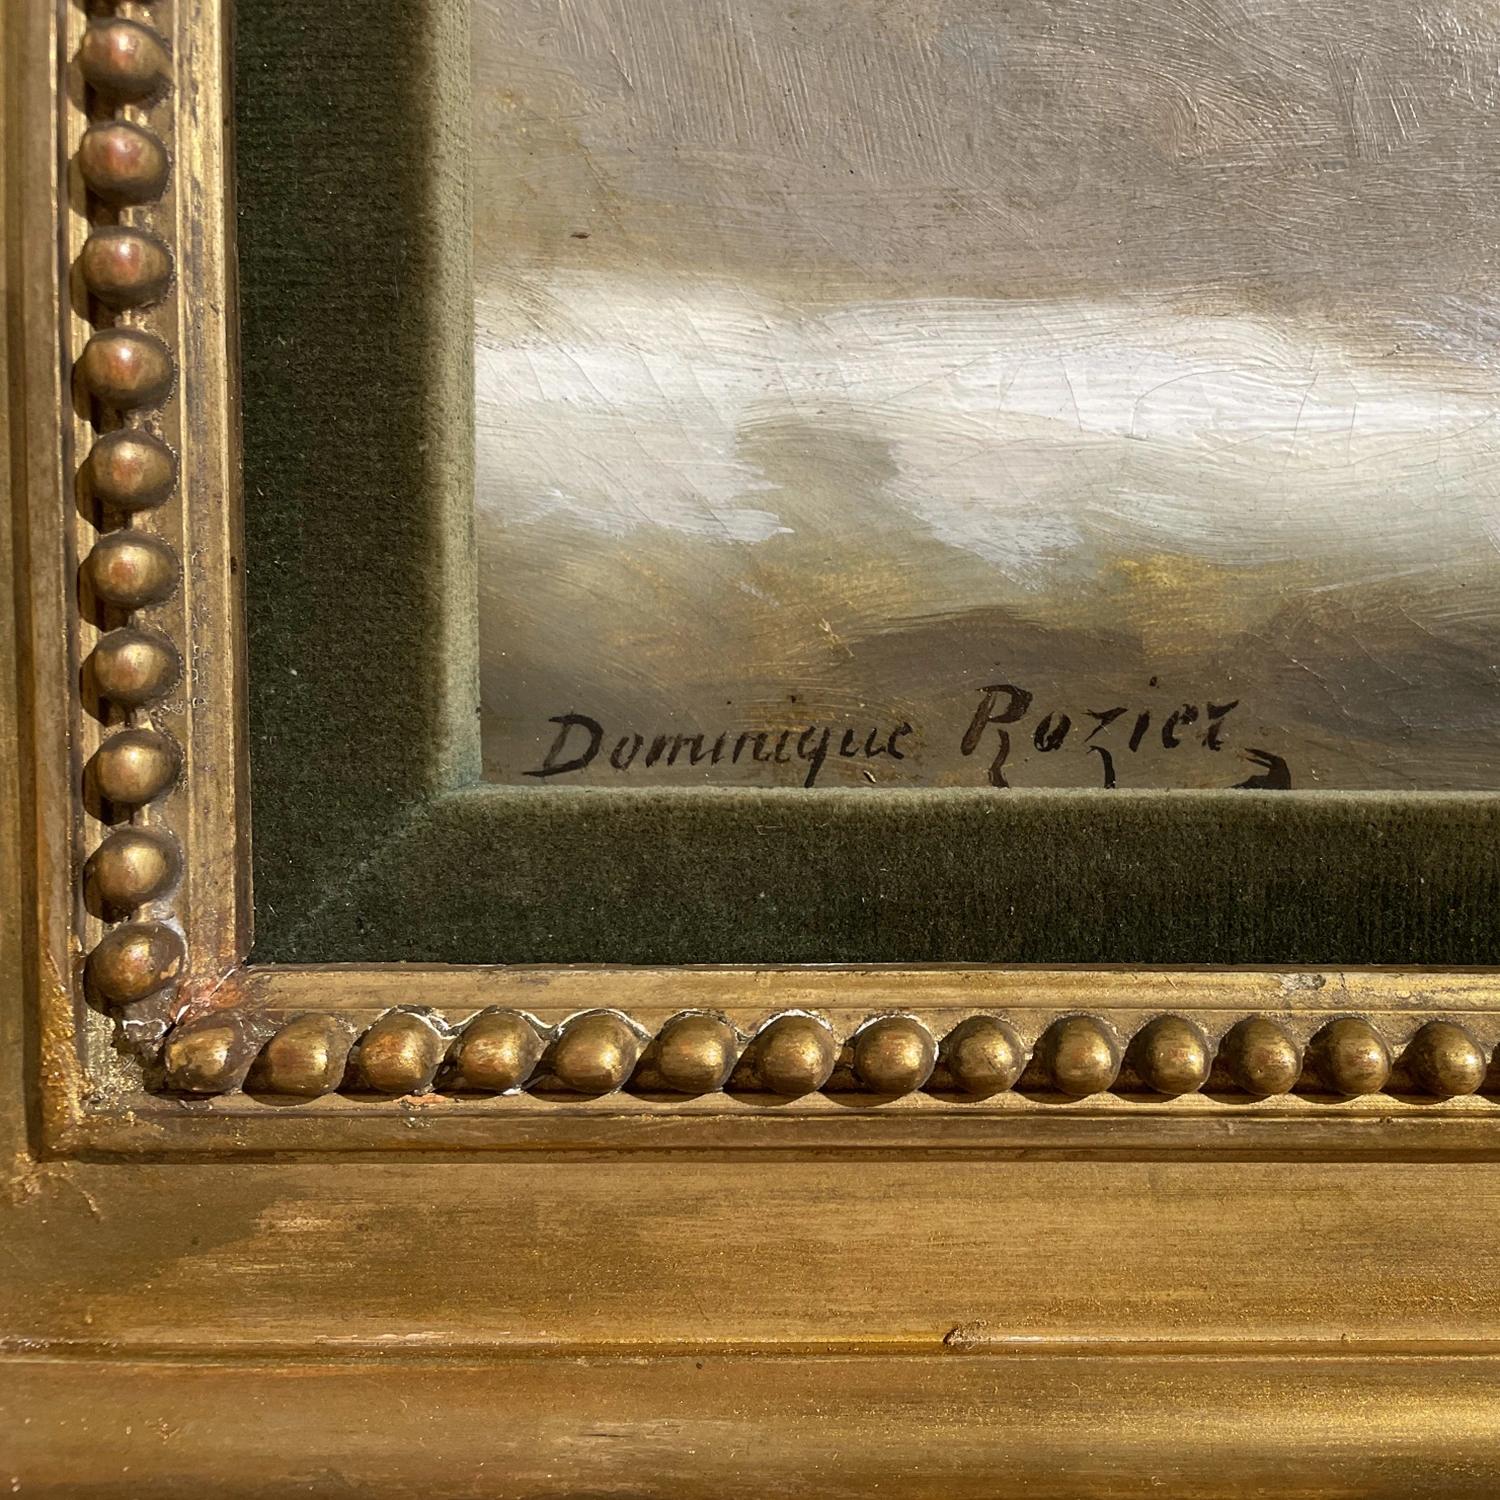 19th Century French Still Life Oil on Canvas Painting by Dominique Hubert Rozier For Sale 1